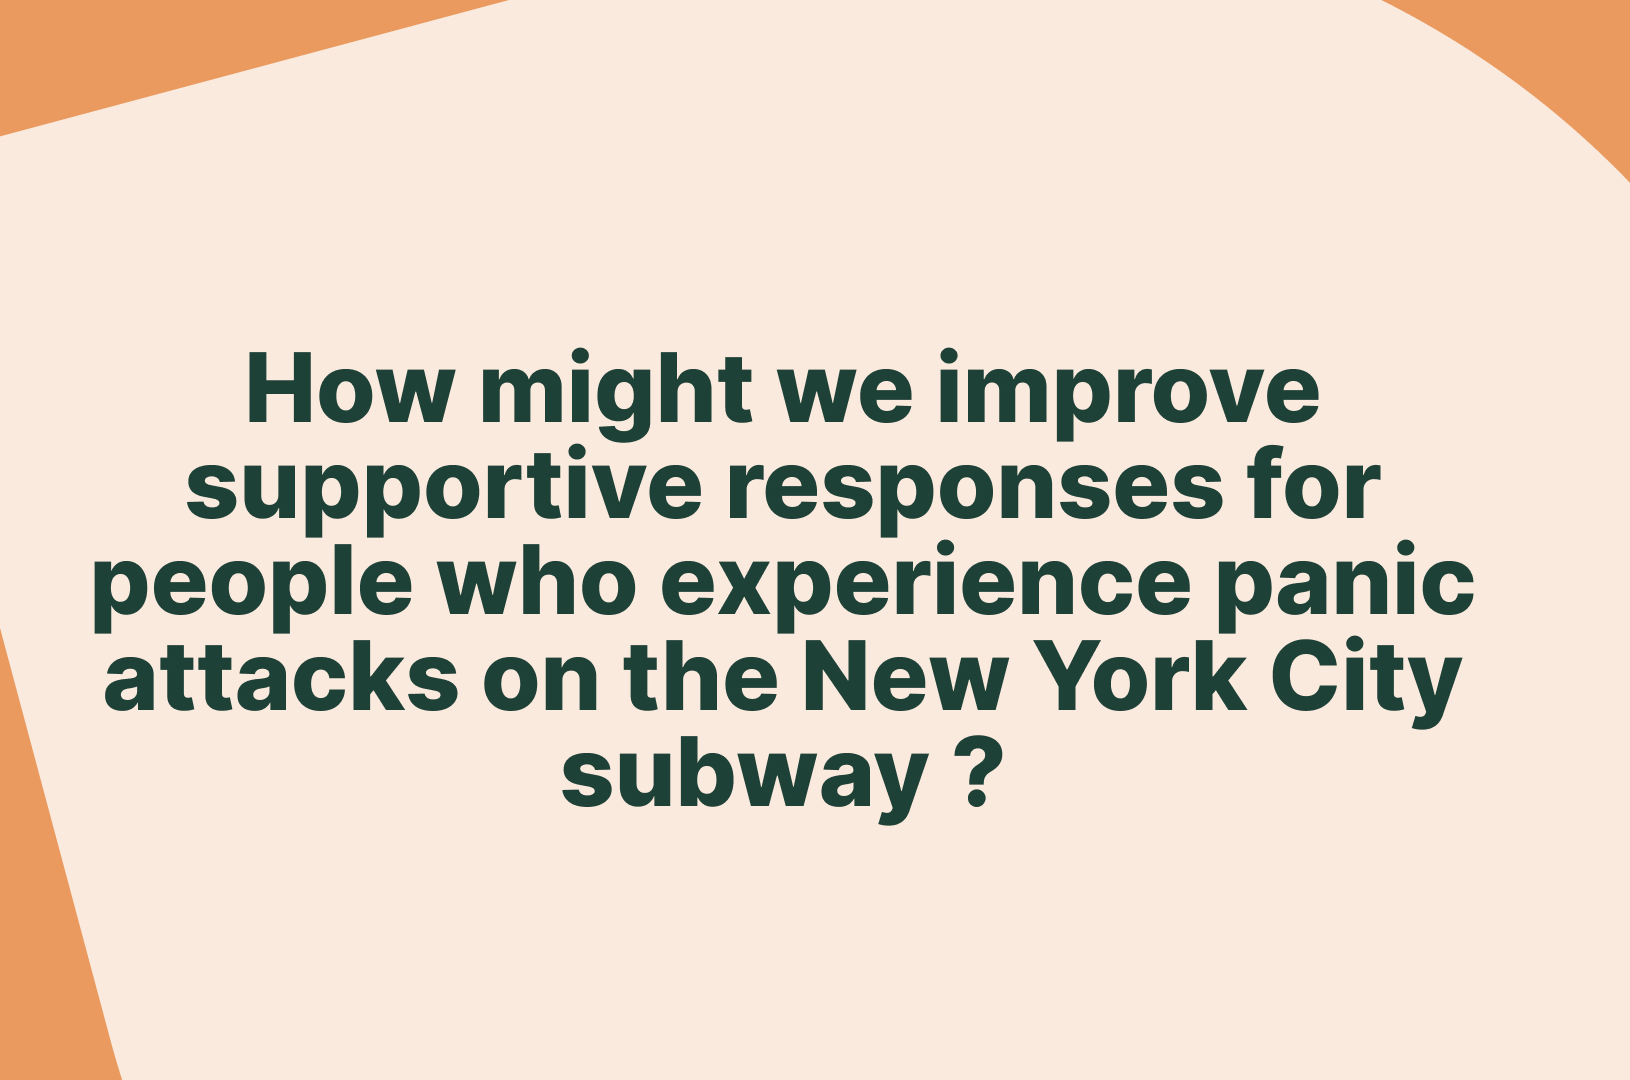 How might we improve supportive responses who experience panic attacks in NYC subways